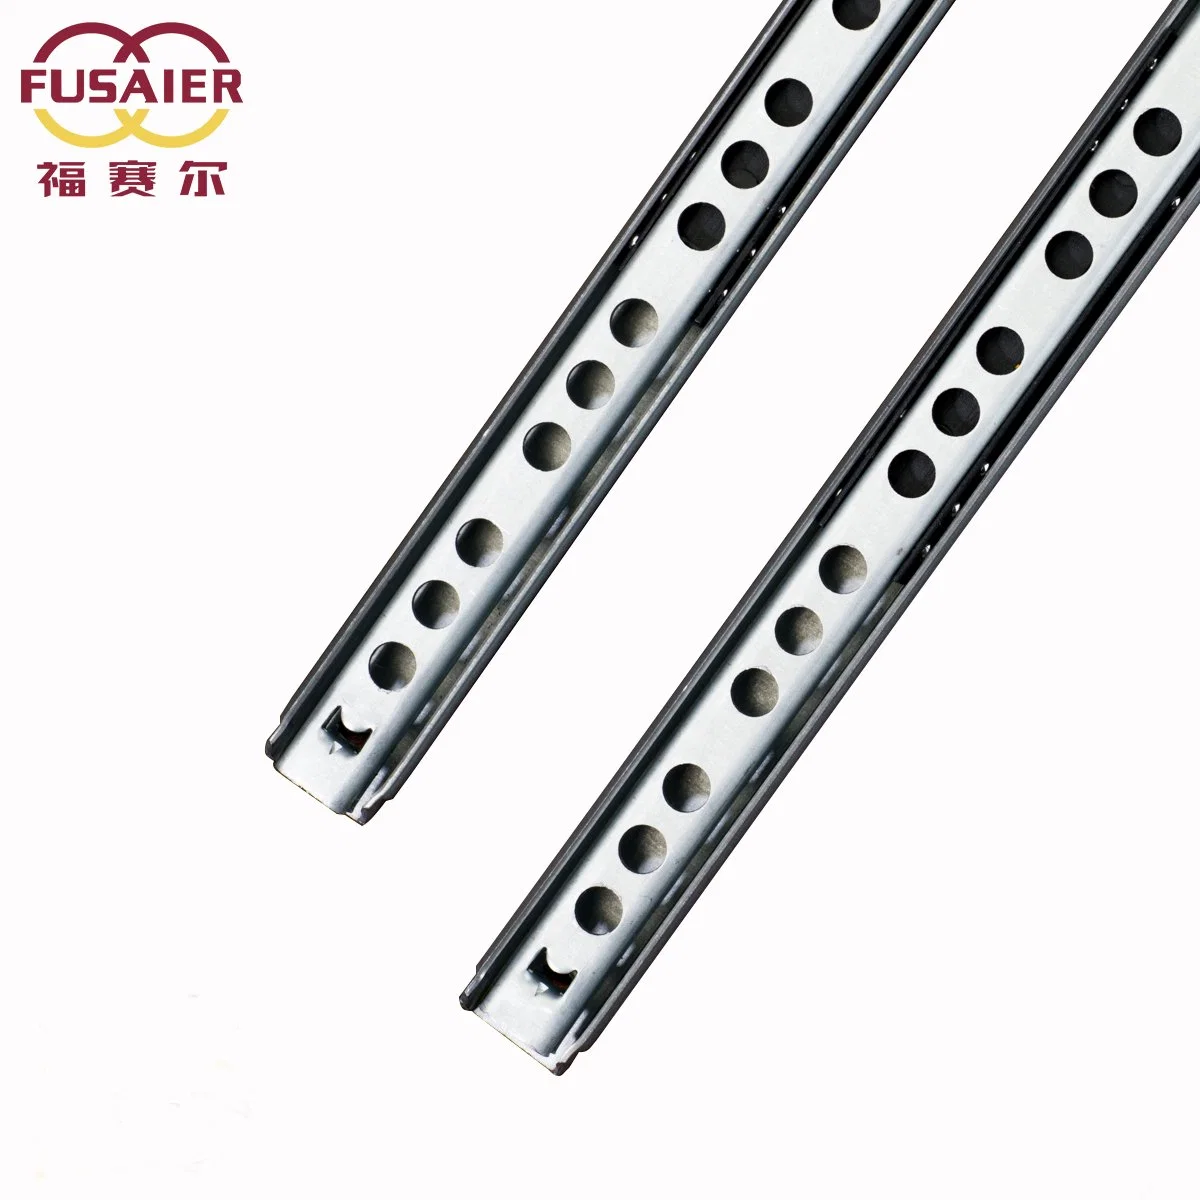 Furniture Hardware 17mm Two Way Retractable Drawer Slide Rail